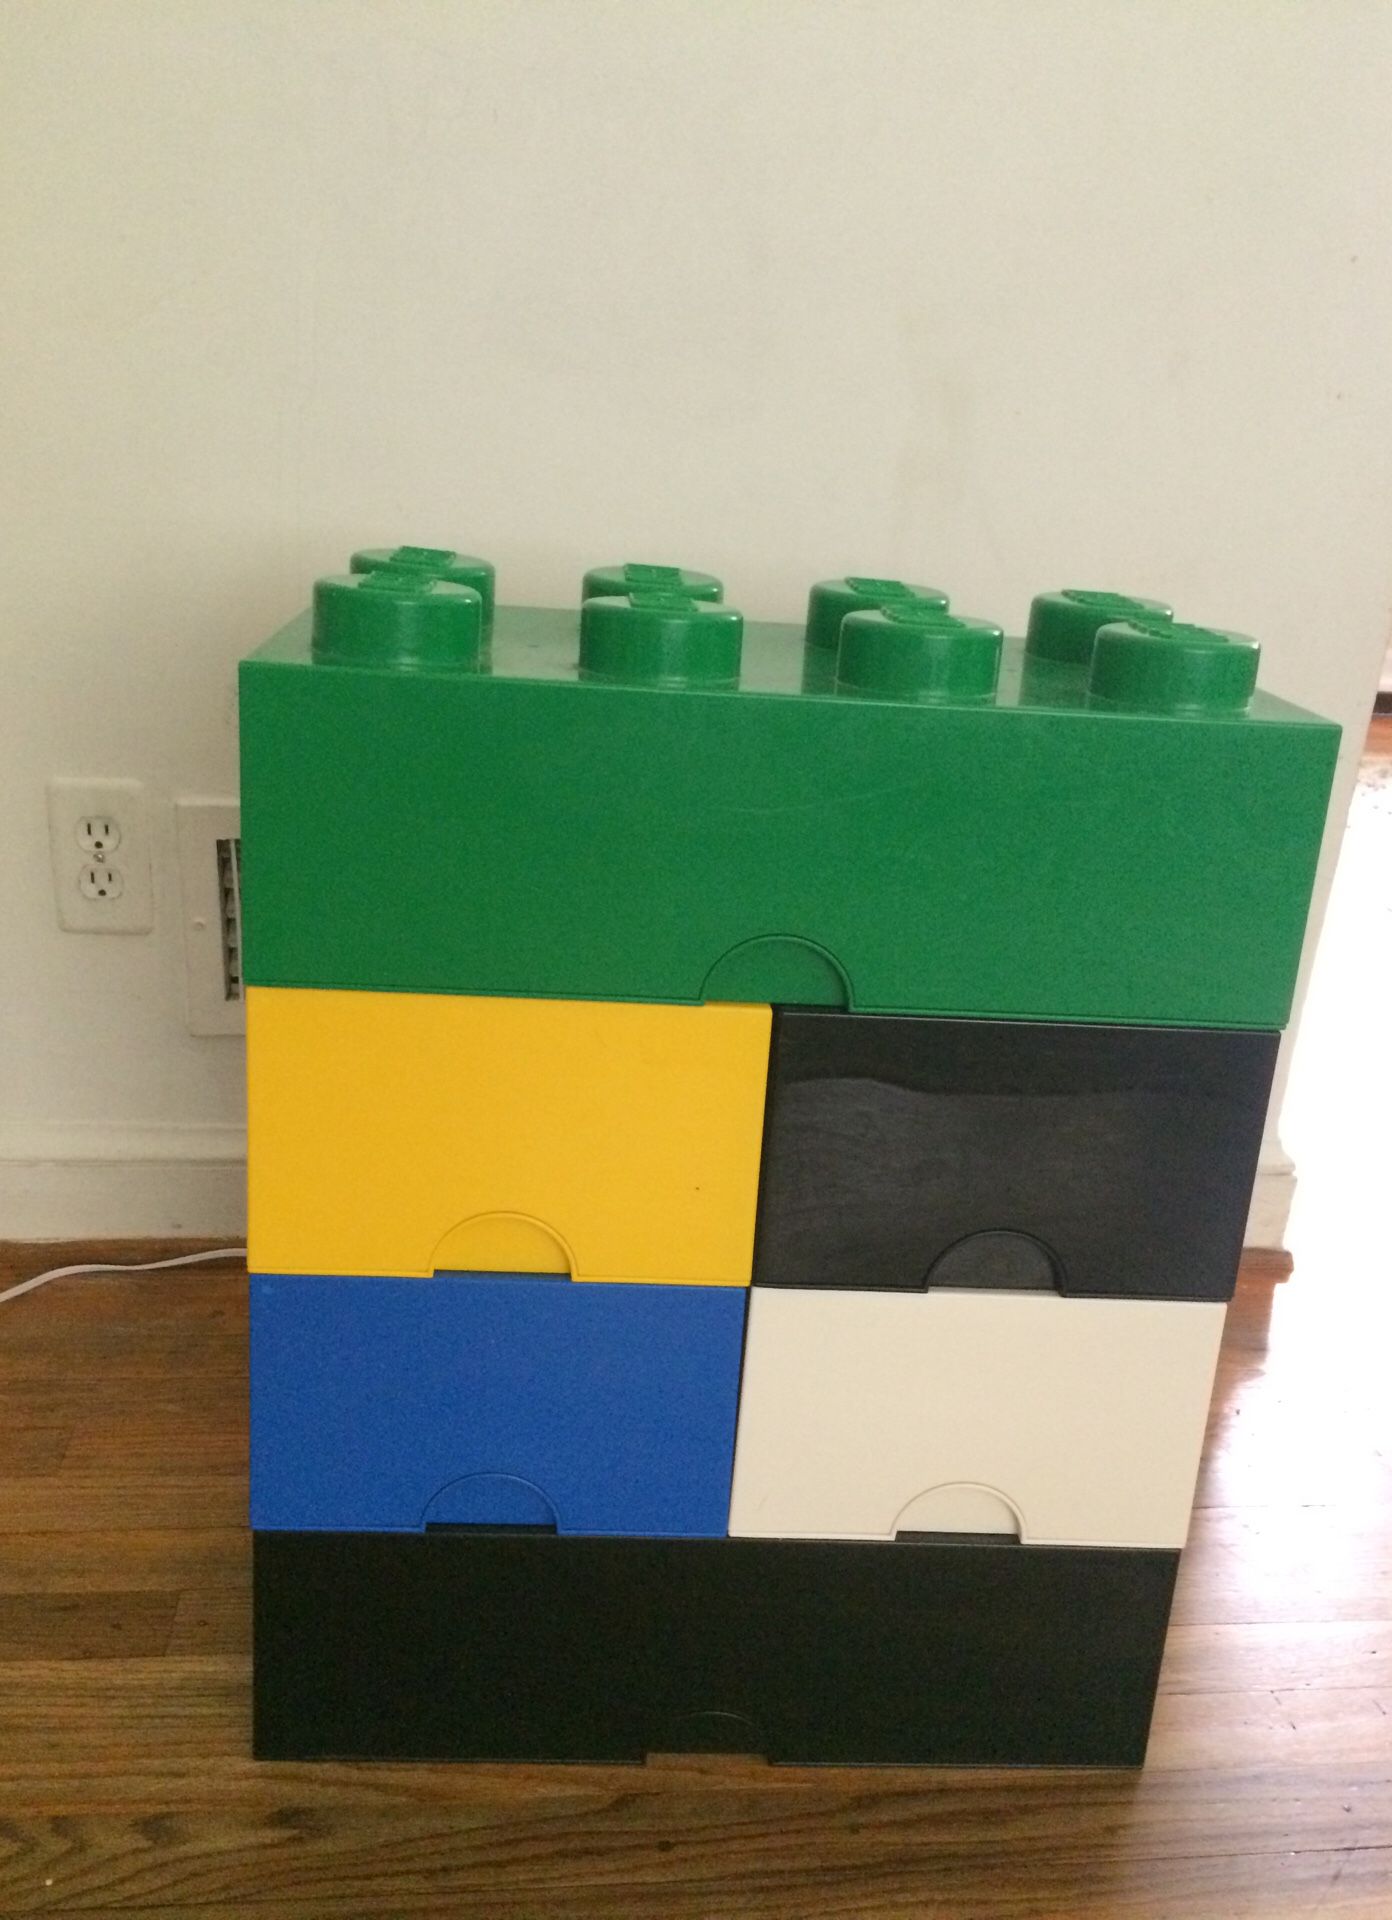 6 stackable LEGO containers filled with lego pieces and 3 LEGO boats